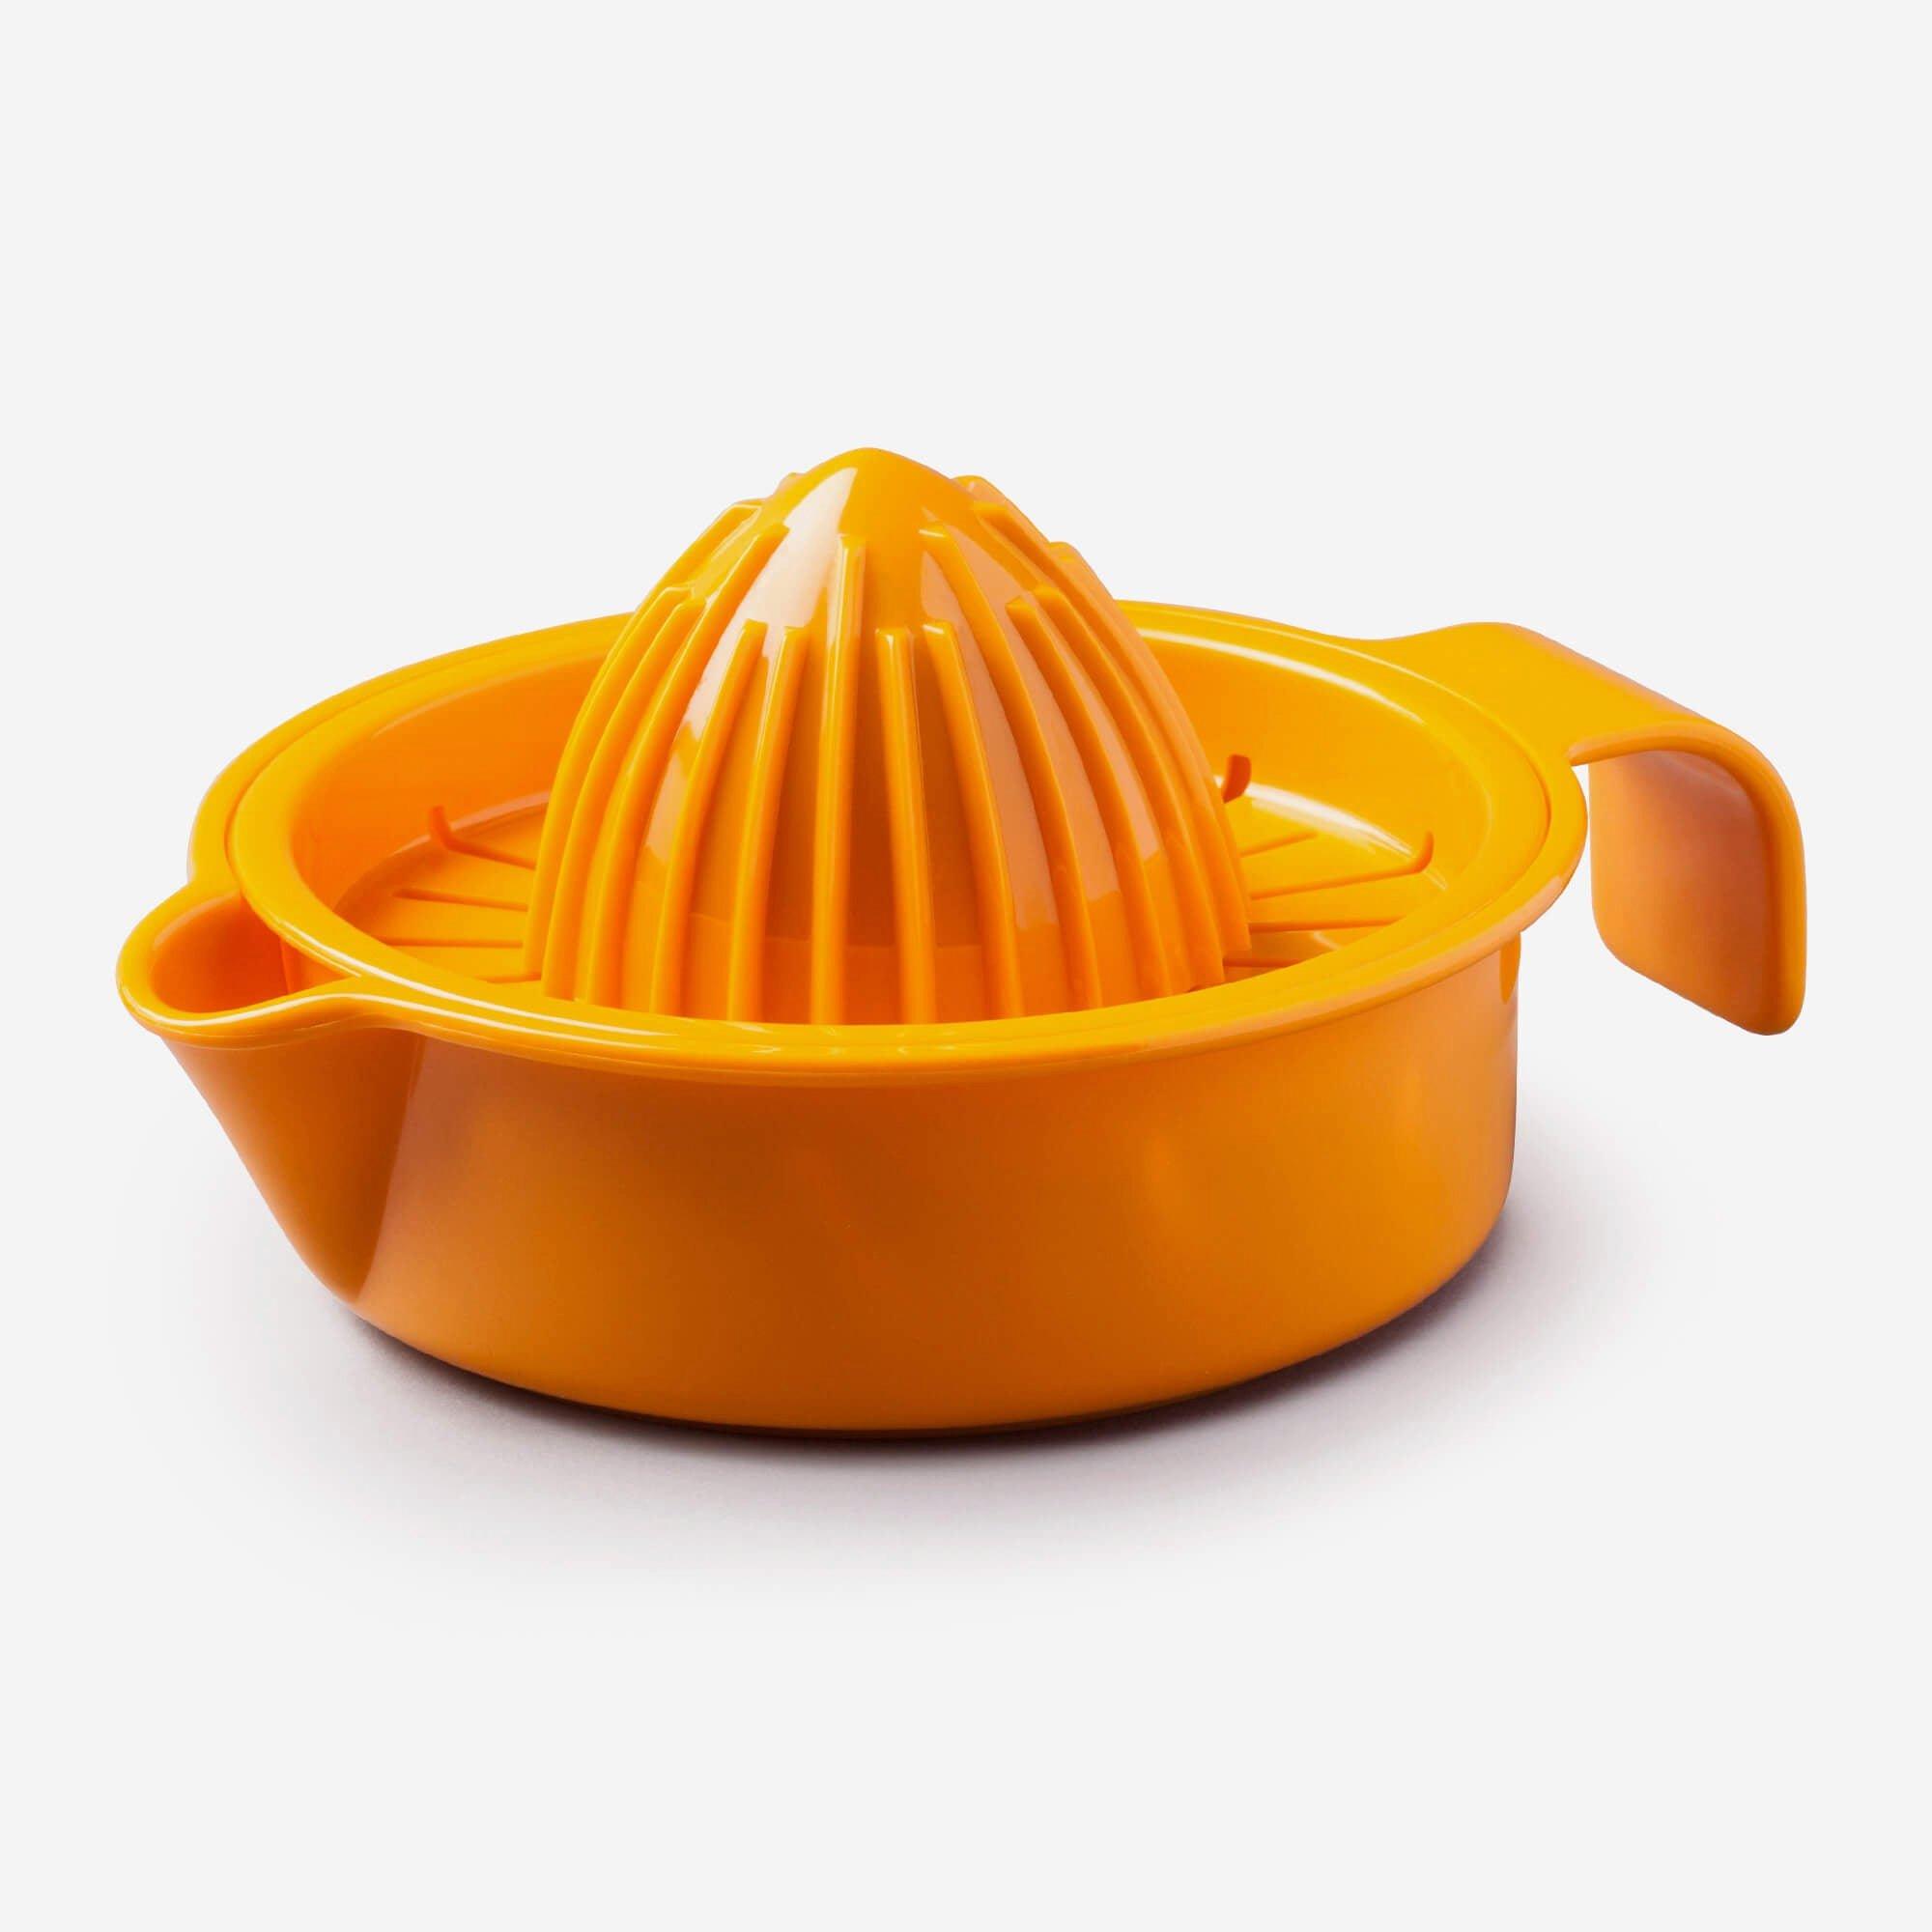 Zeal Citrus Juicer Dual Head with Collecting Bowl